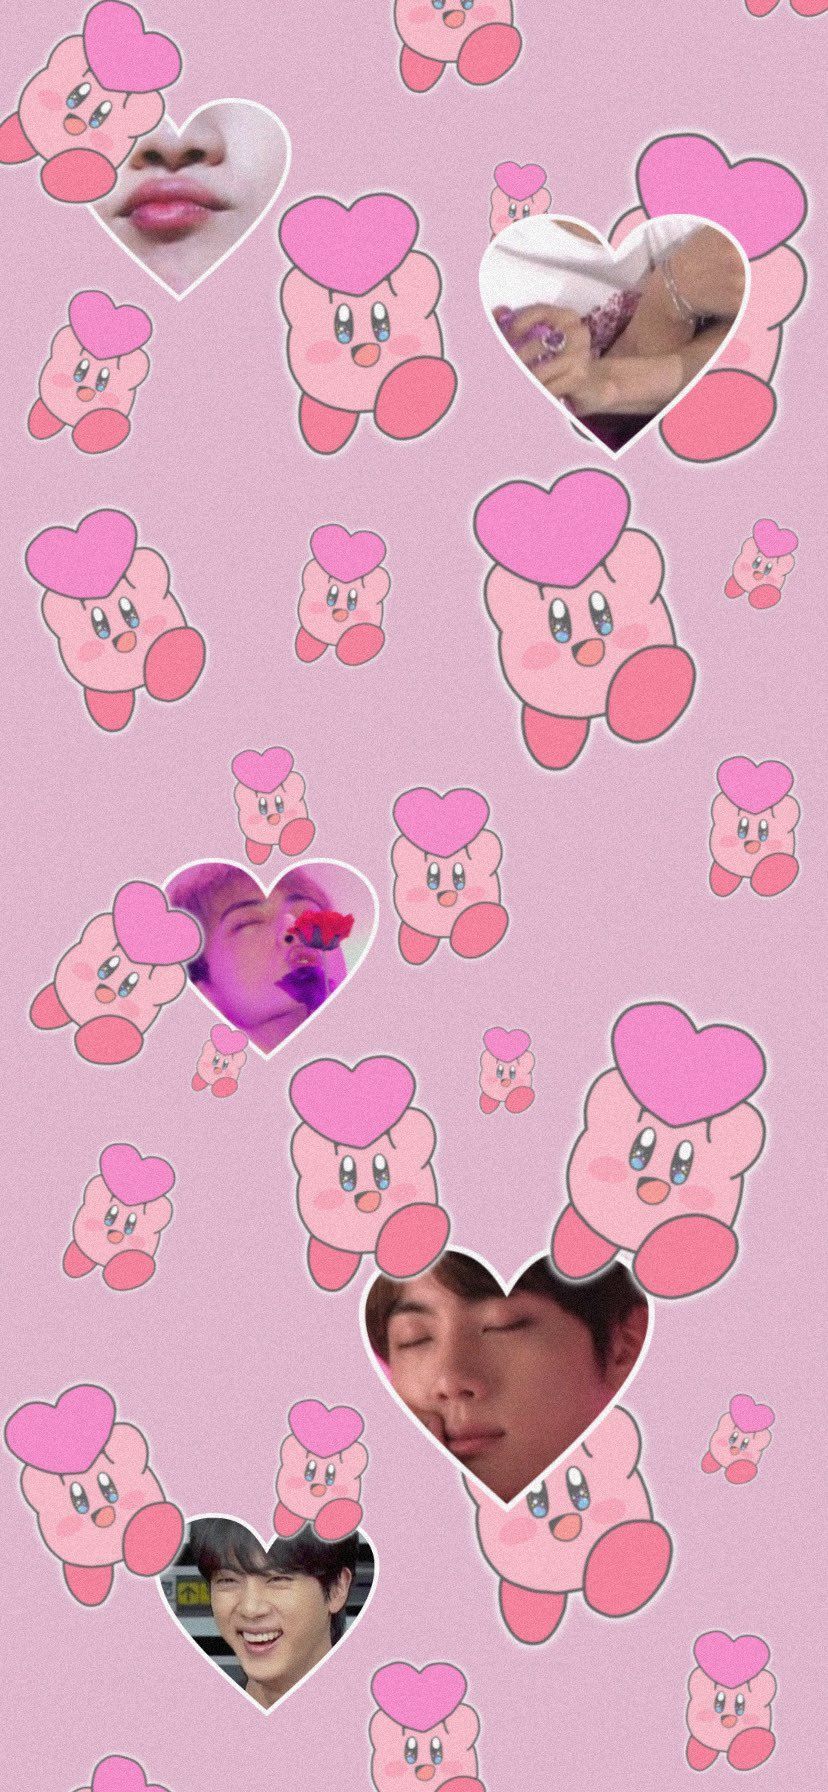 Pink kirby background with jimin and jungkook from bts in the bottom - Kirby